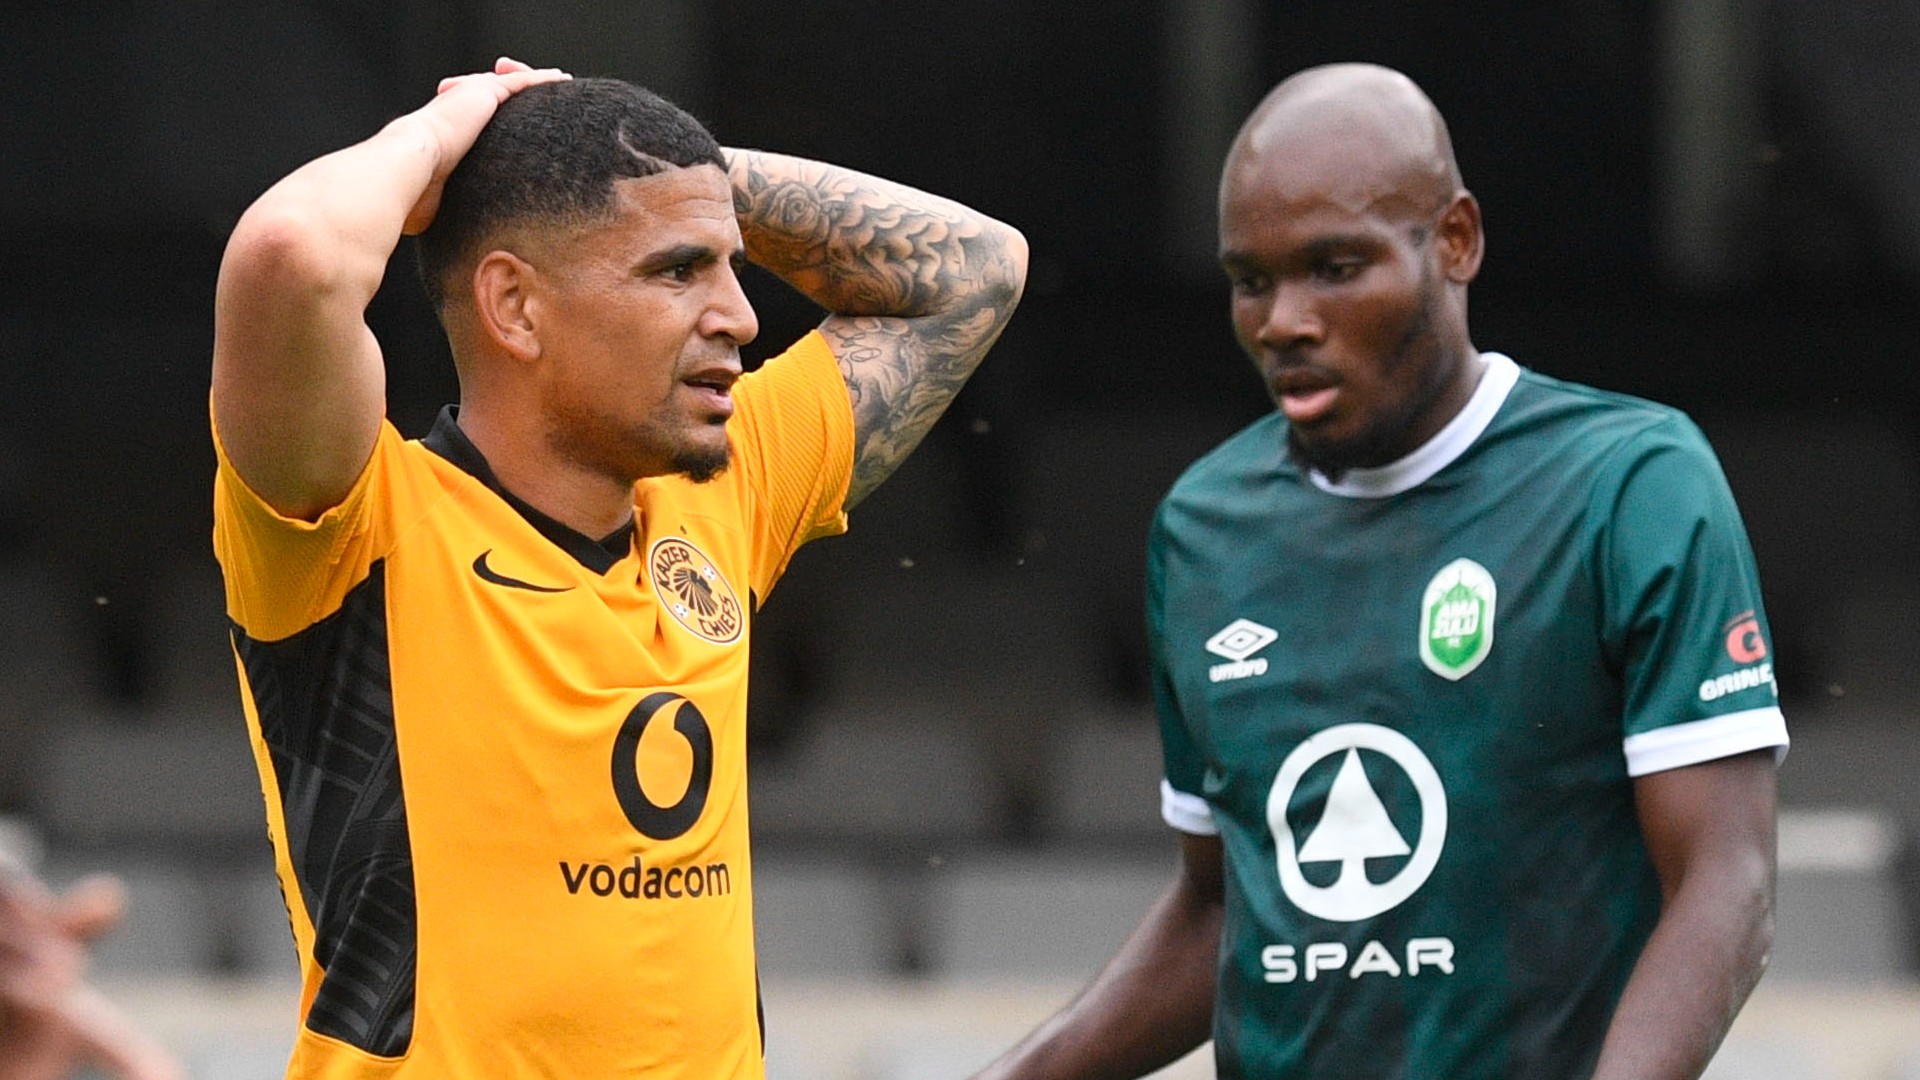 Kaizer Chiefs players don’t love the badge, they are just playing for money – Mayo